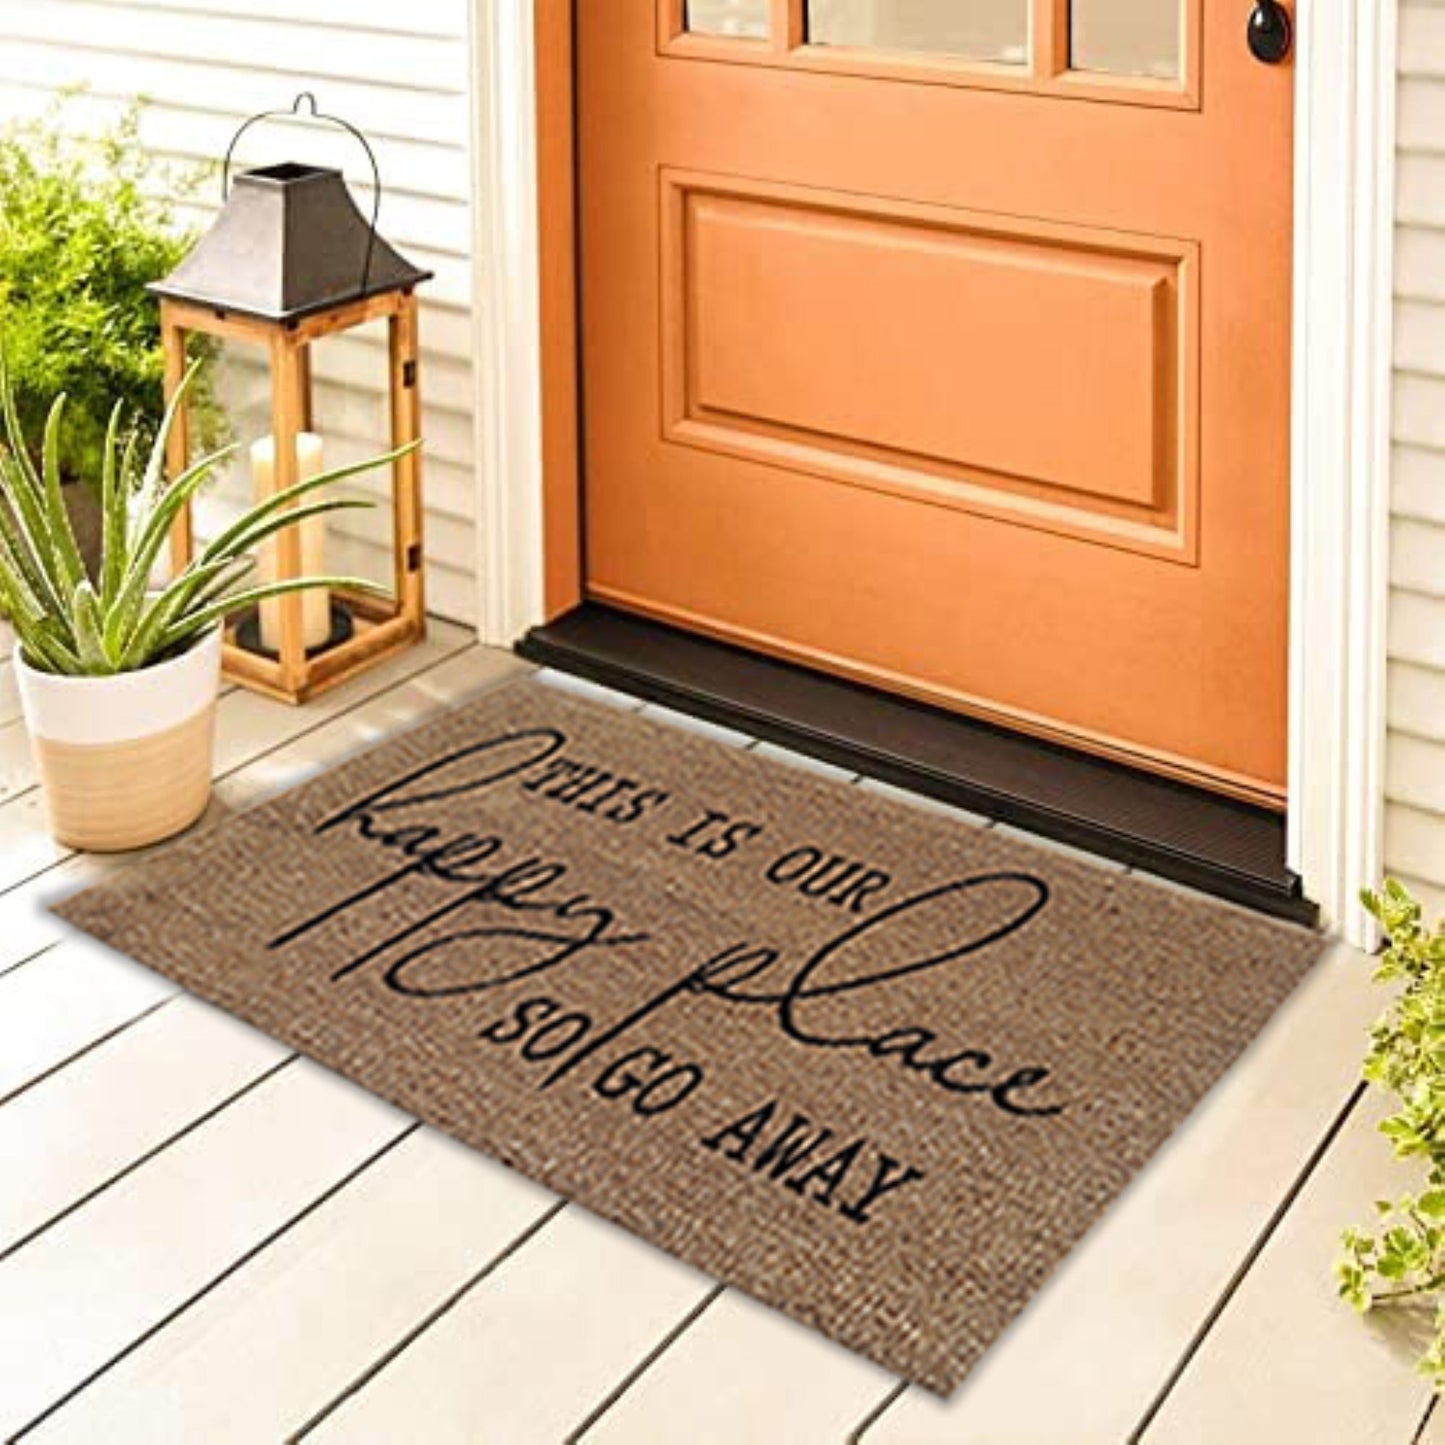 30% Off, Coir Doormat "This Is Our Happy Place So Go Away",